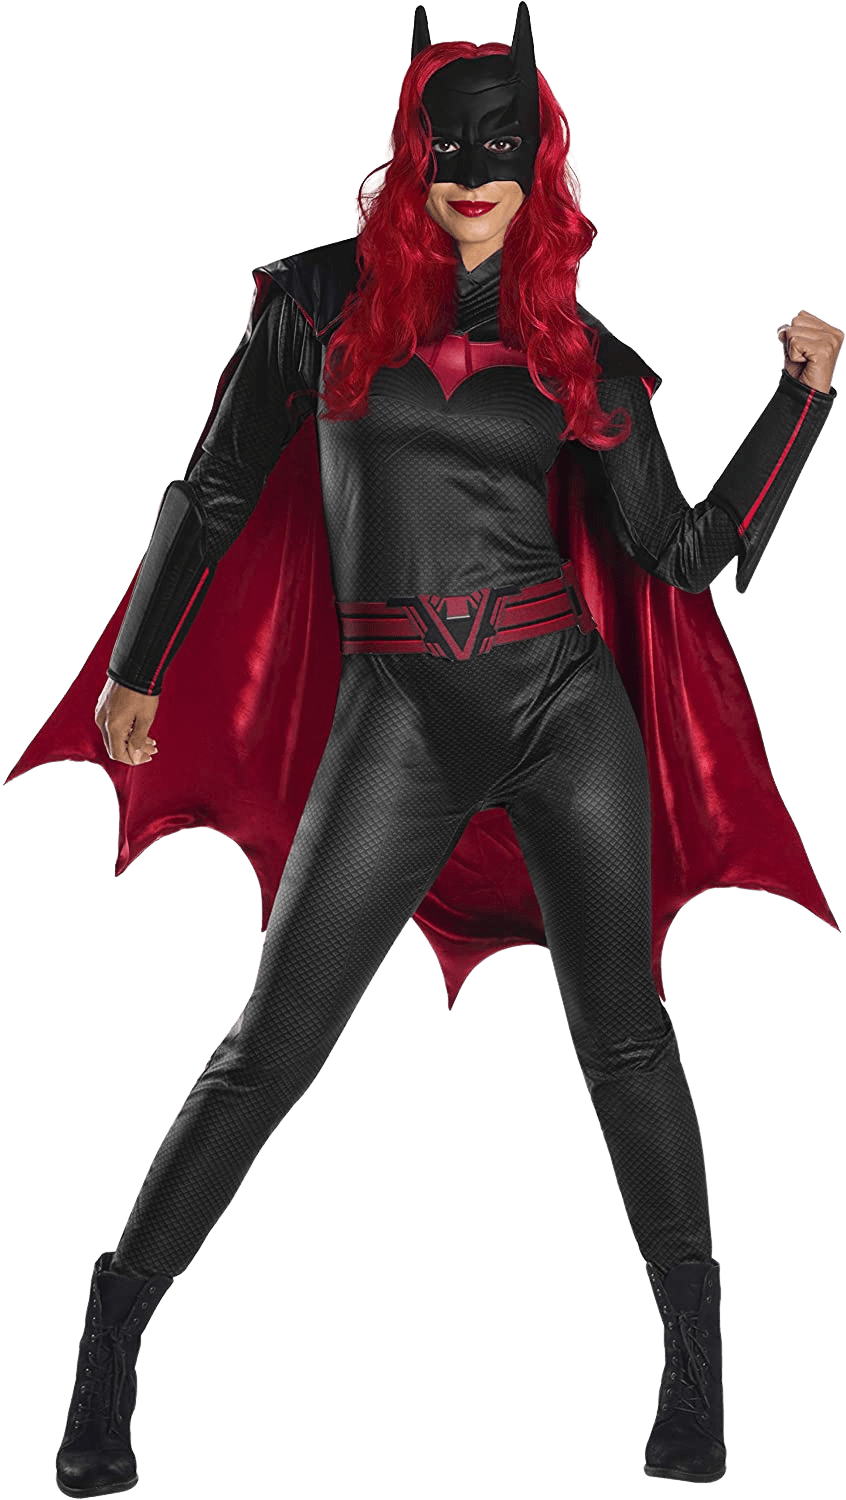 Womens Dc Comics Batwoman Costume | Decor Gifts and More